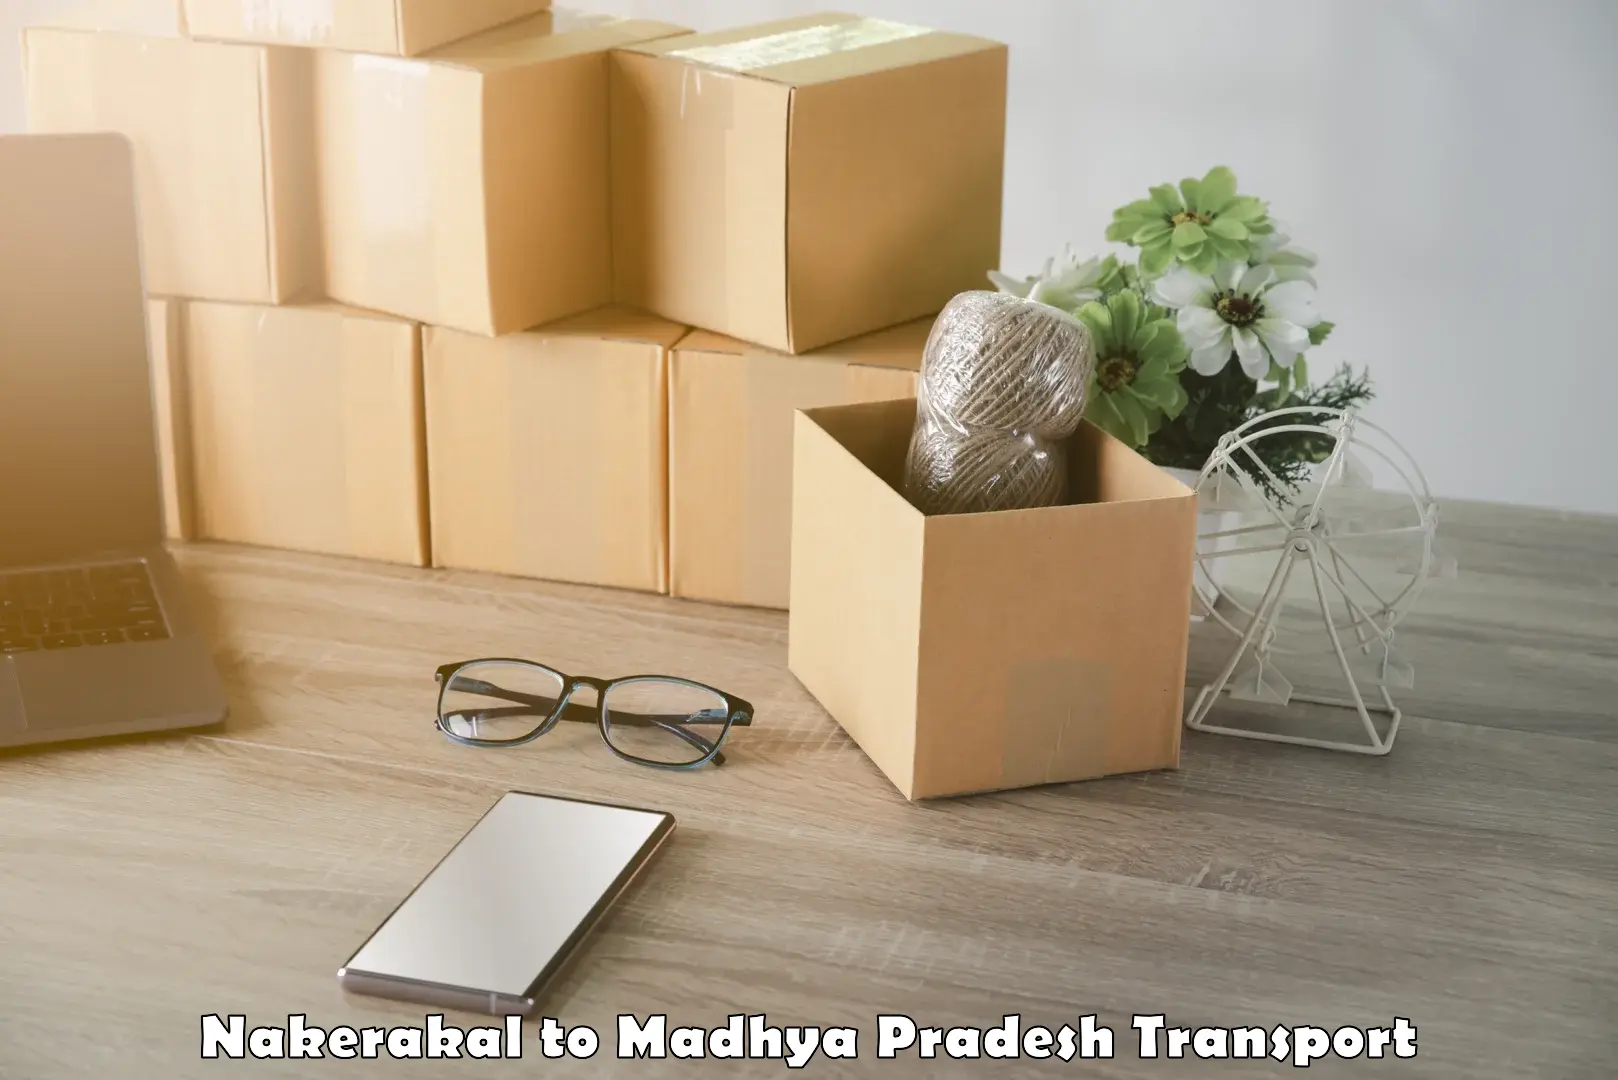 Truck transport companies in India Nakerakal to Madwas